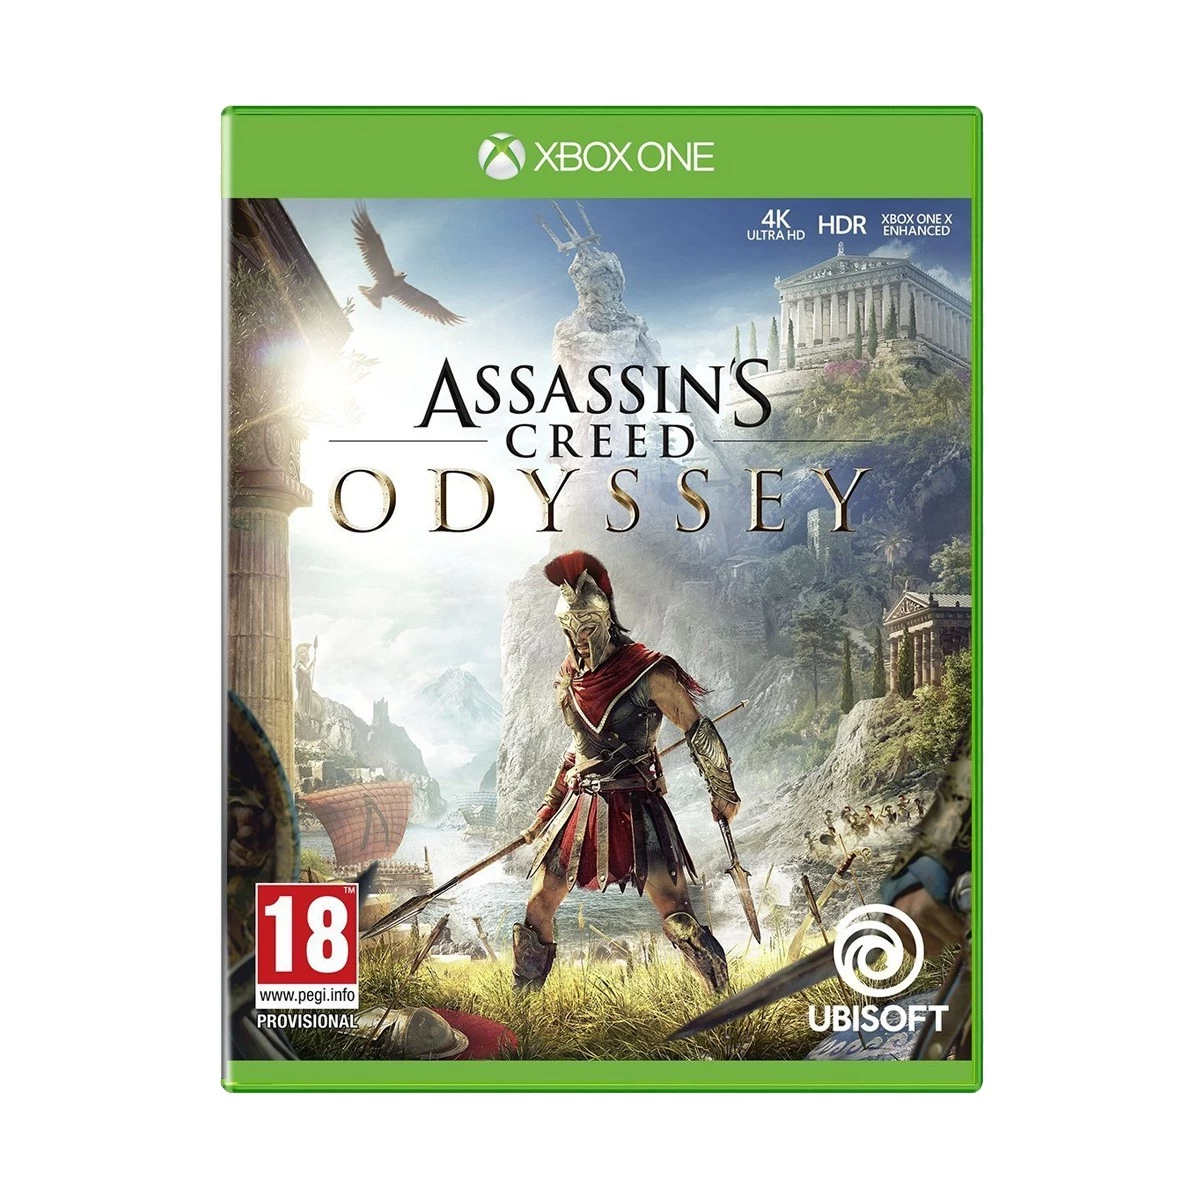 action role playing games xbox one